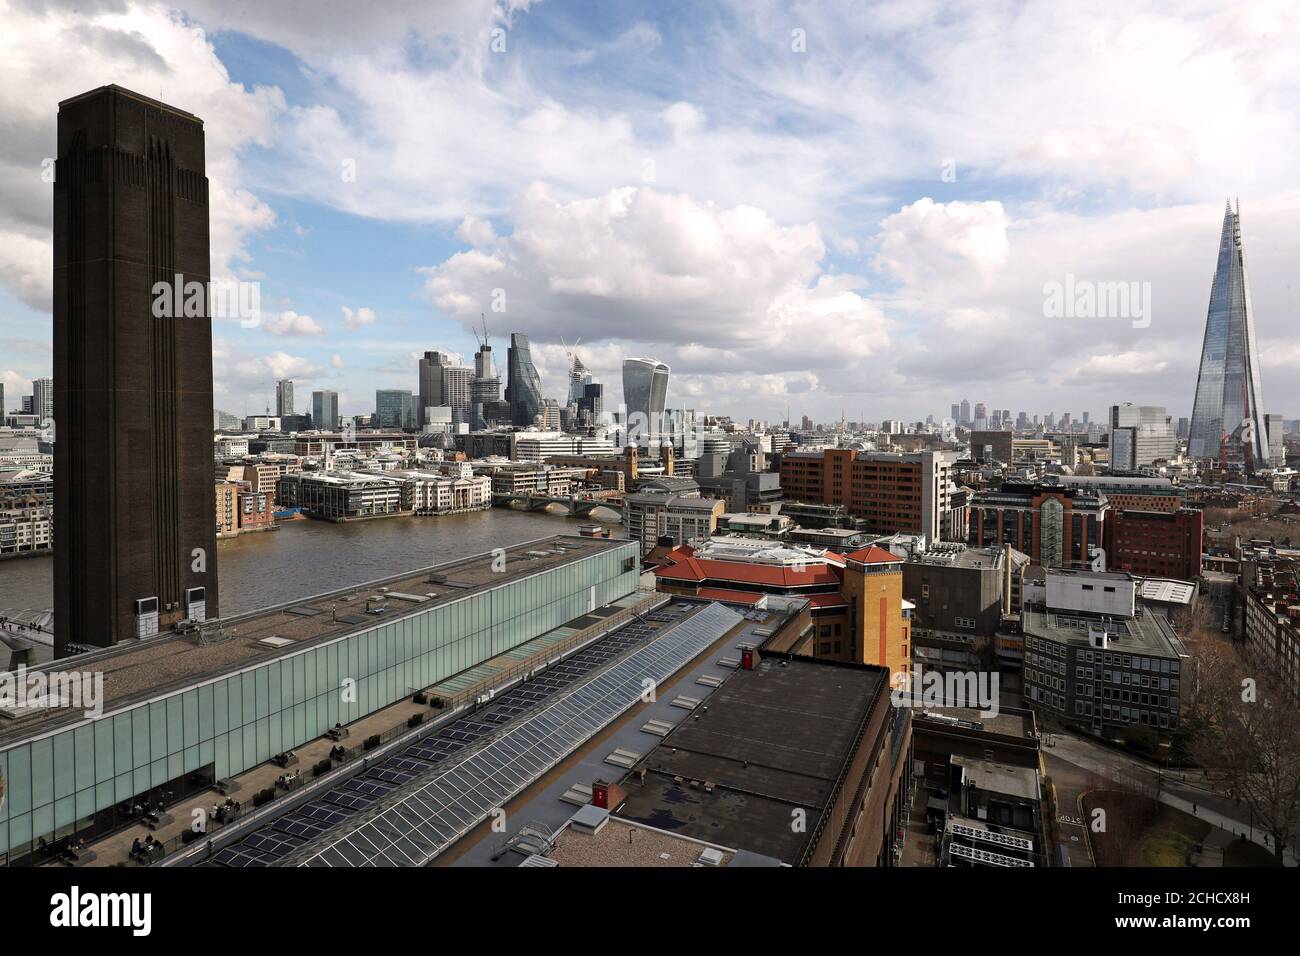 The Turbine Hall, City of London, Canary Wharf and The Shard as seen from the viewing deck of the Blavatnik Building, Tate Modern, London. Stock Photo